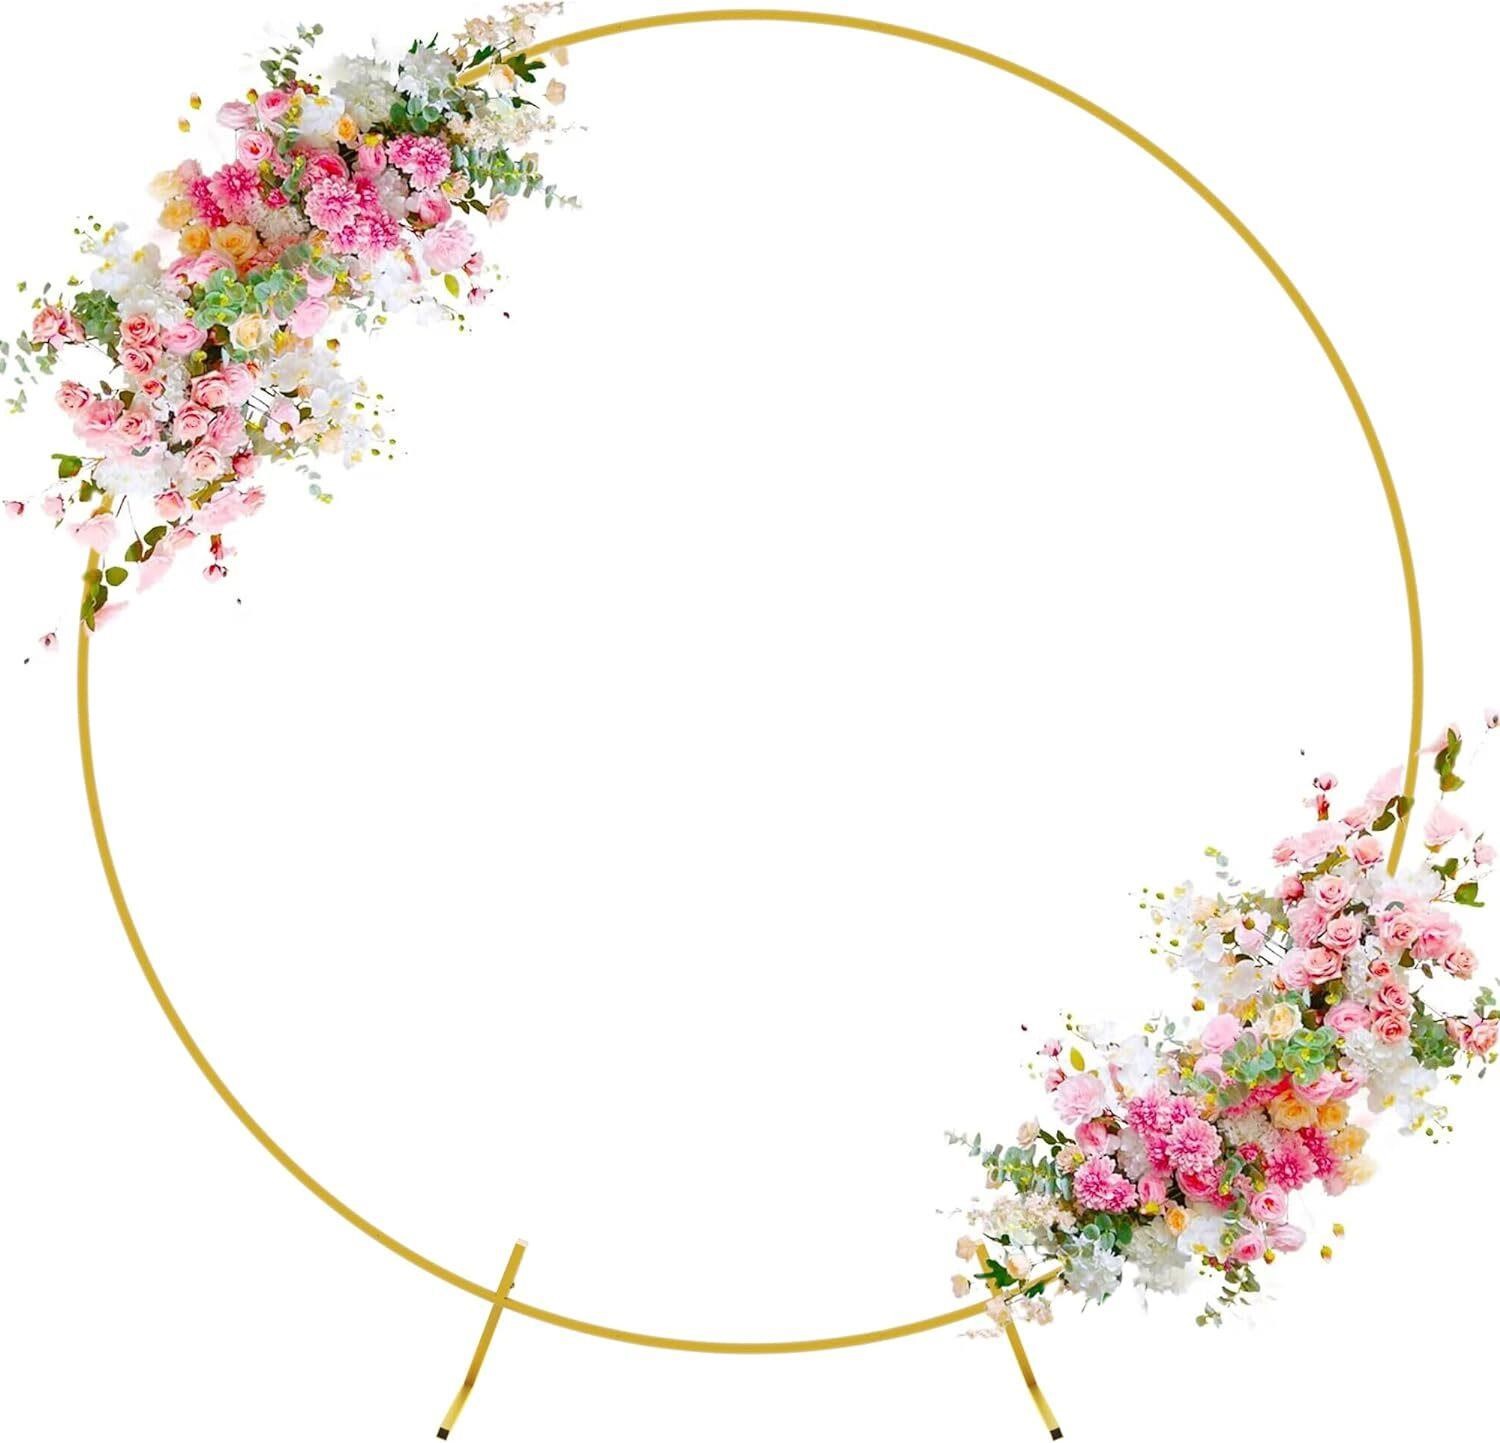 Wokceer Round Arch Backdrop Stand 6.6FT Gold